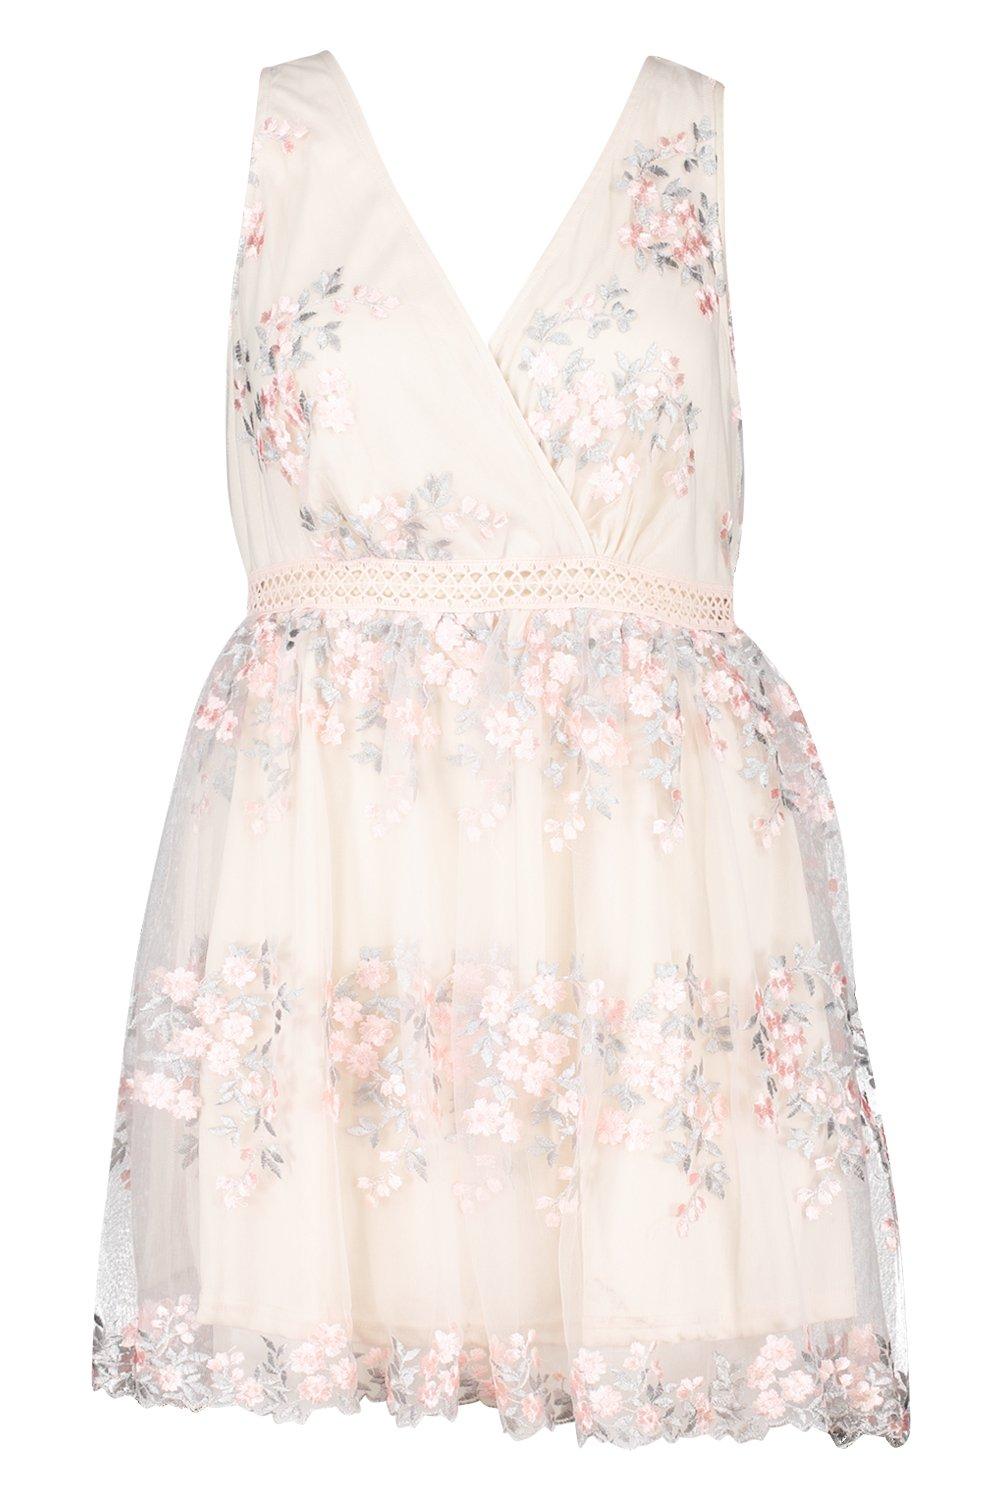 Boohoo Occasion Floral Embroidery Wrap Skater Dress